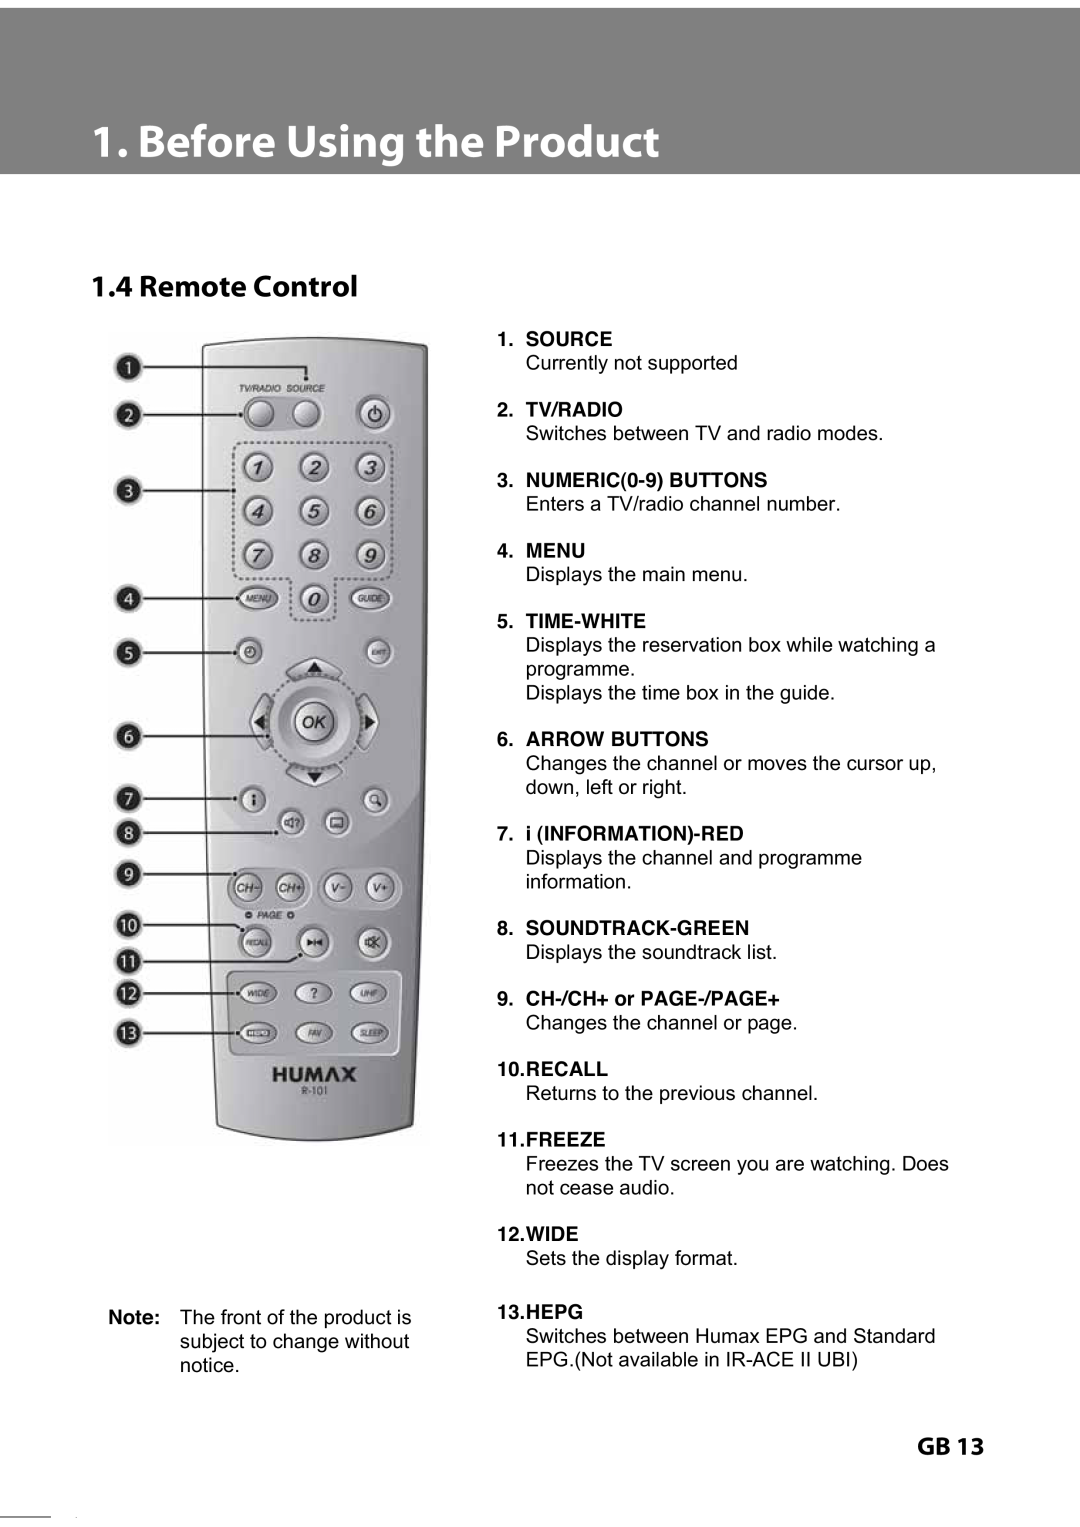 Humax IR-TWIN Source, Currently not supported, Tv/Radio, Switches between TV and radio modes, NUMERIC0-9 BUTTONS, Menu 